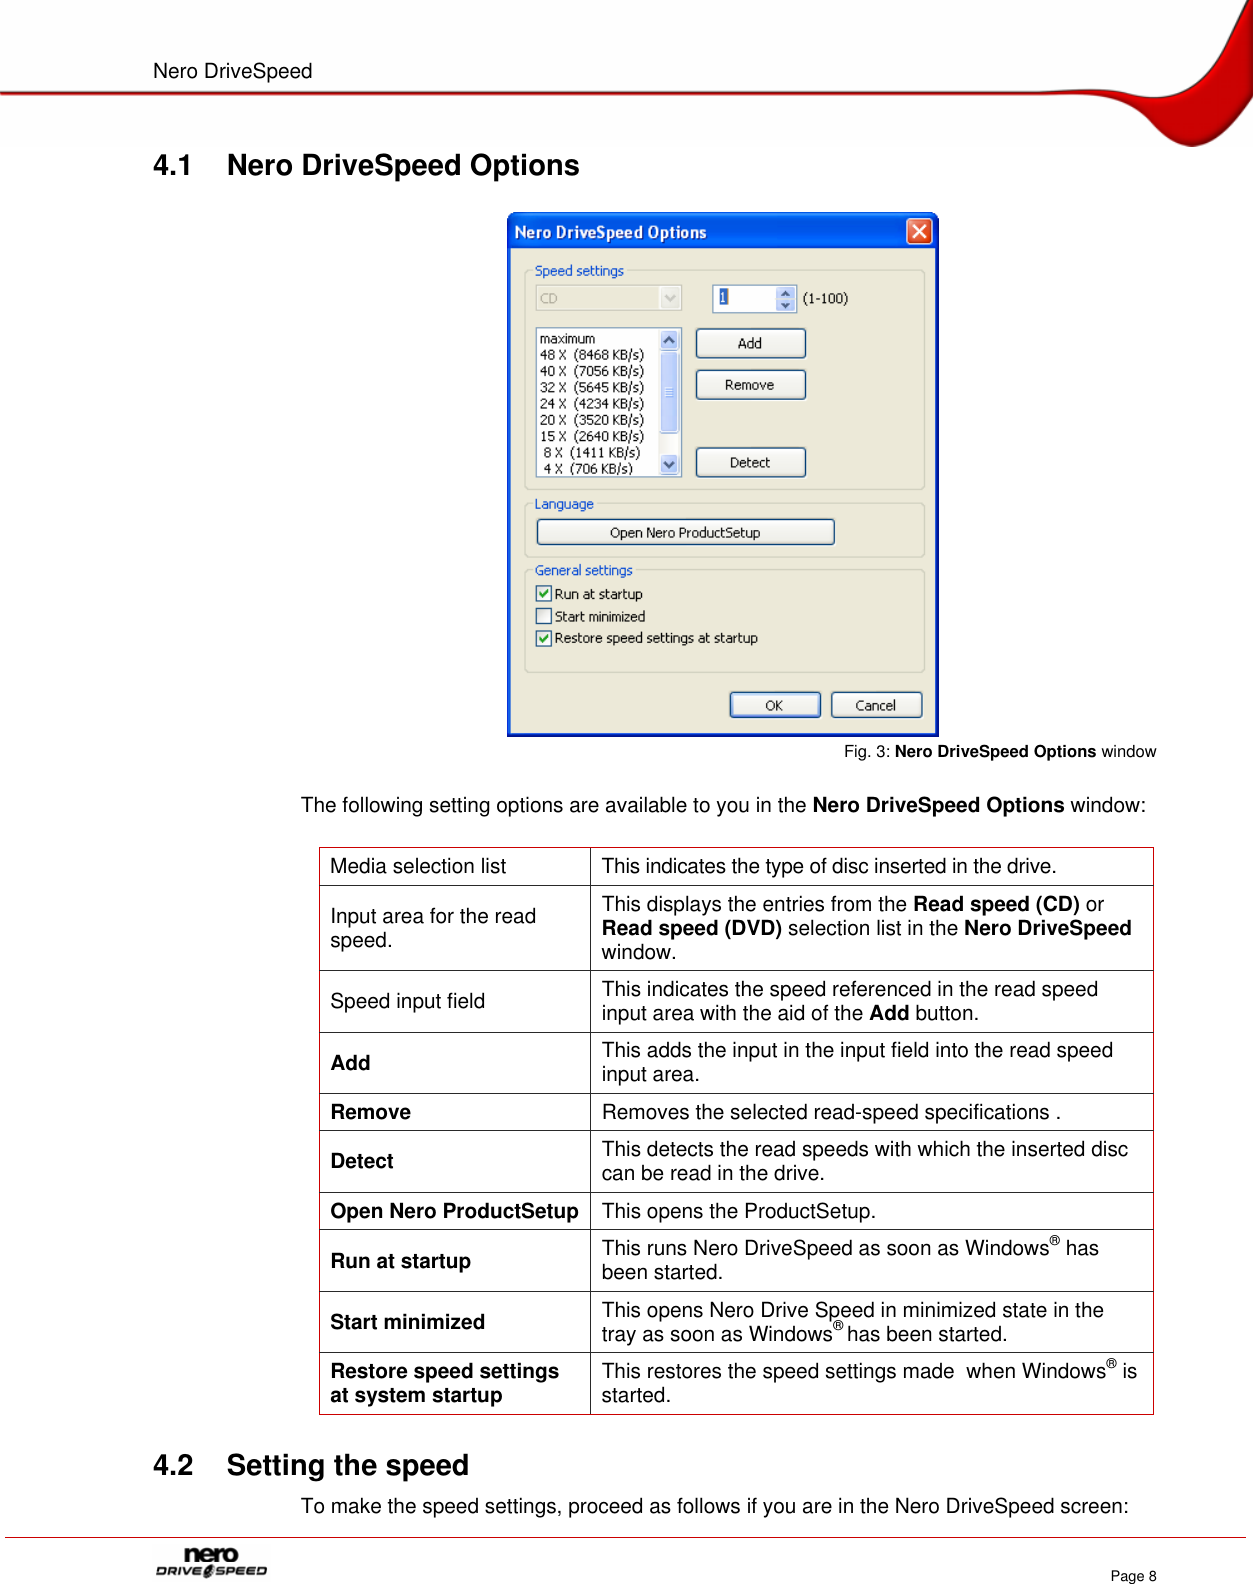 Page 8 of 12 - Nero - DRD_UML_ENG_INTRN_070223_V01__Nero_DriveSpeed_ENG Drive Speed User Manual Eng